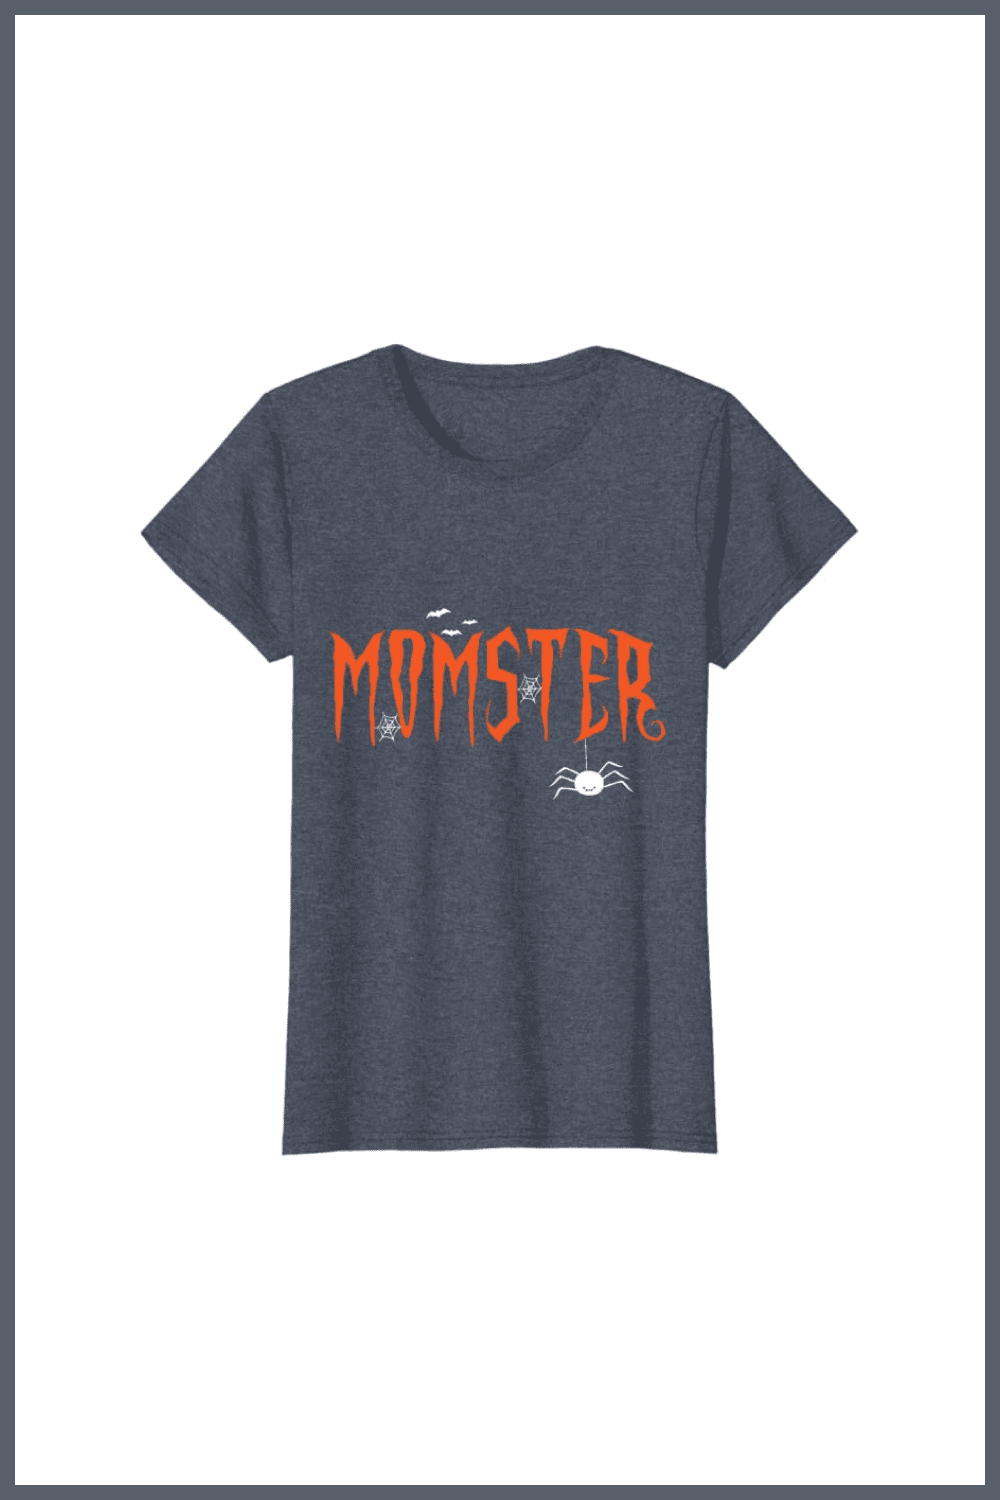 Gray T-shirt with orange Momster and white spider.